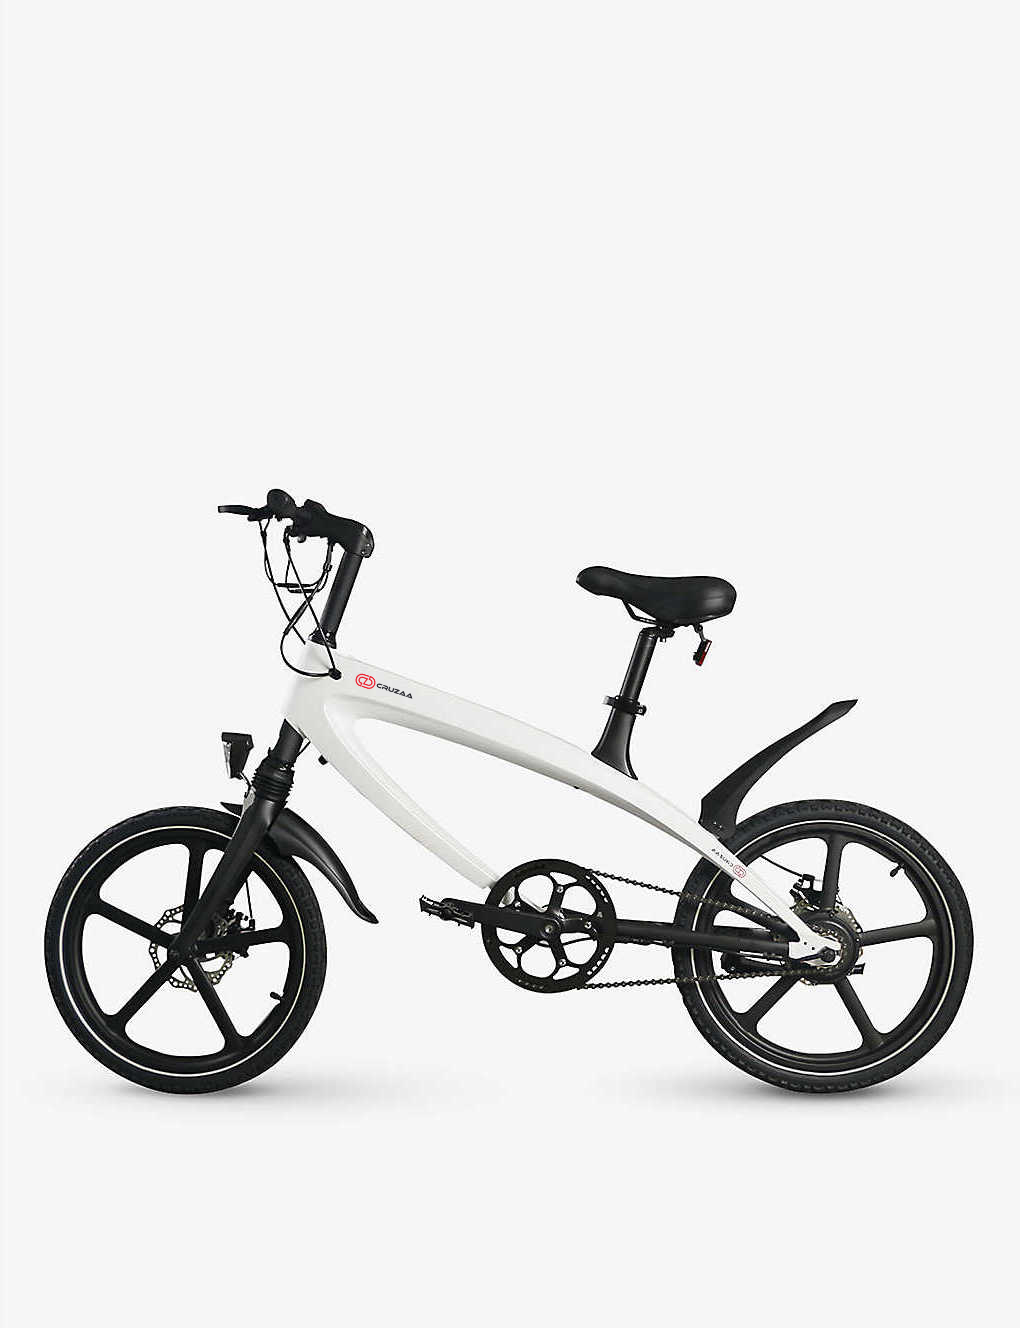 The Official Racing White E-Bike with Built-in Speakers & Bluetooth (Range up to 60km)